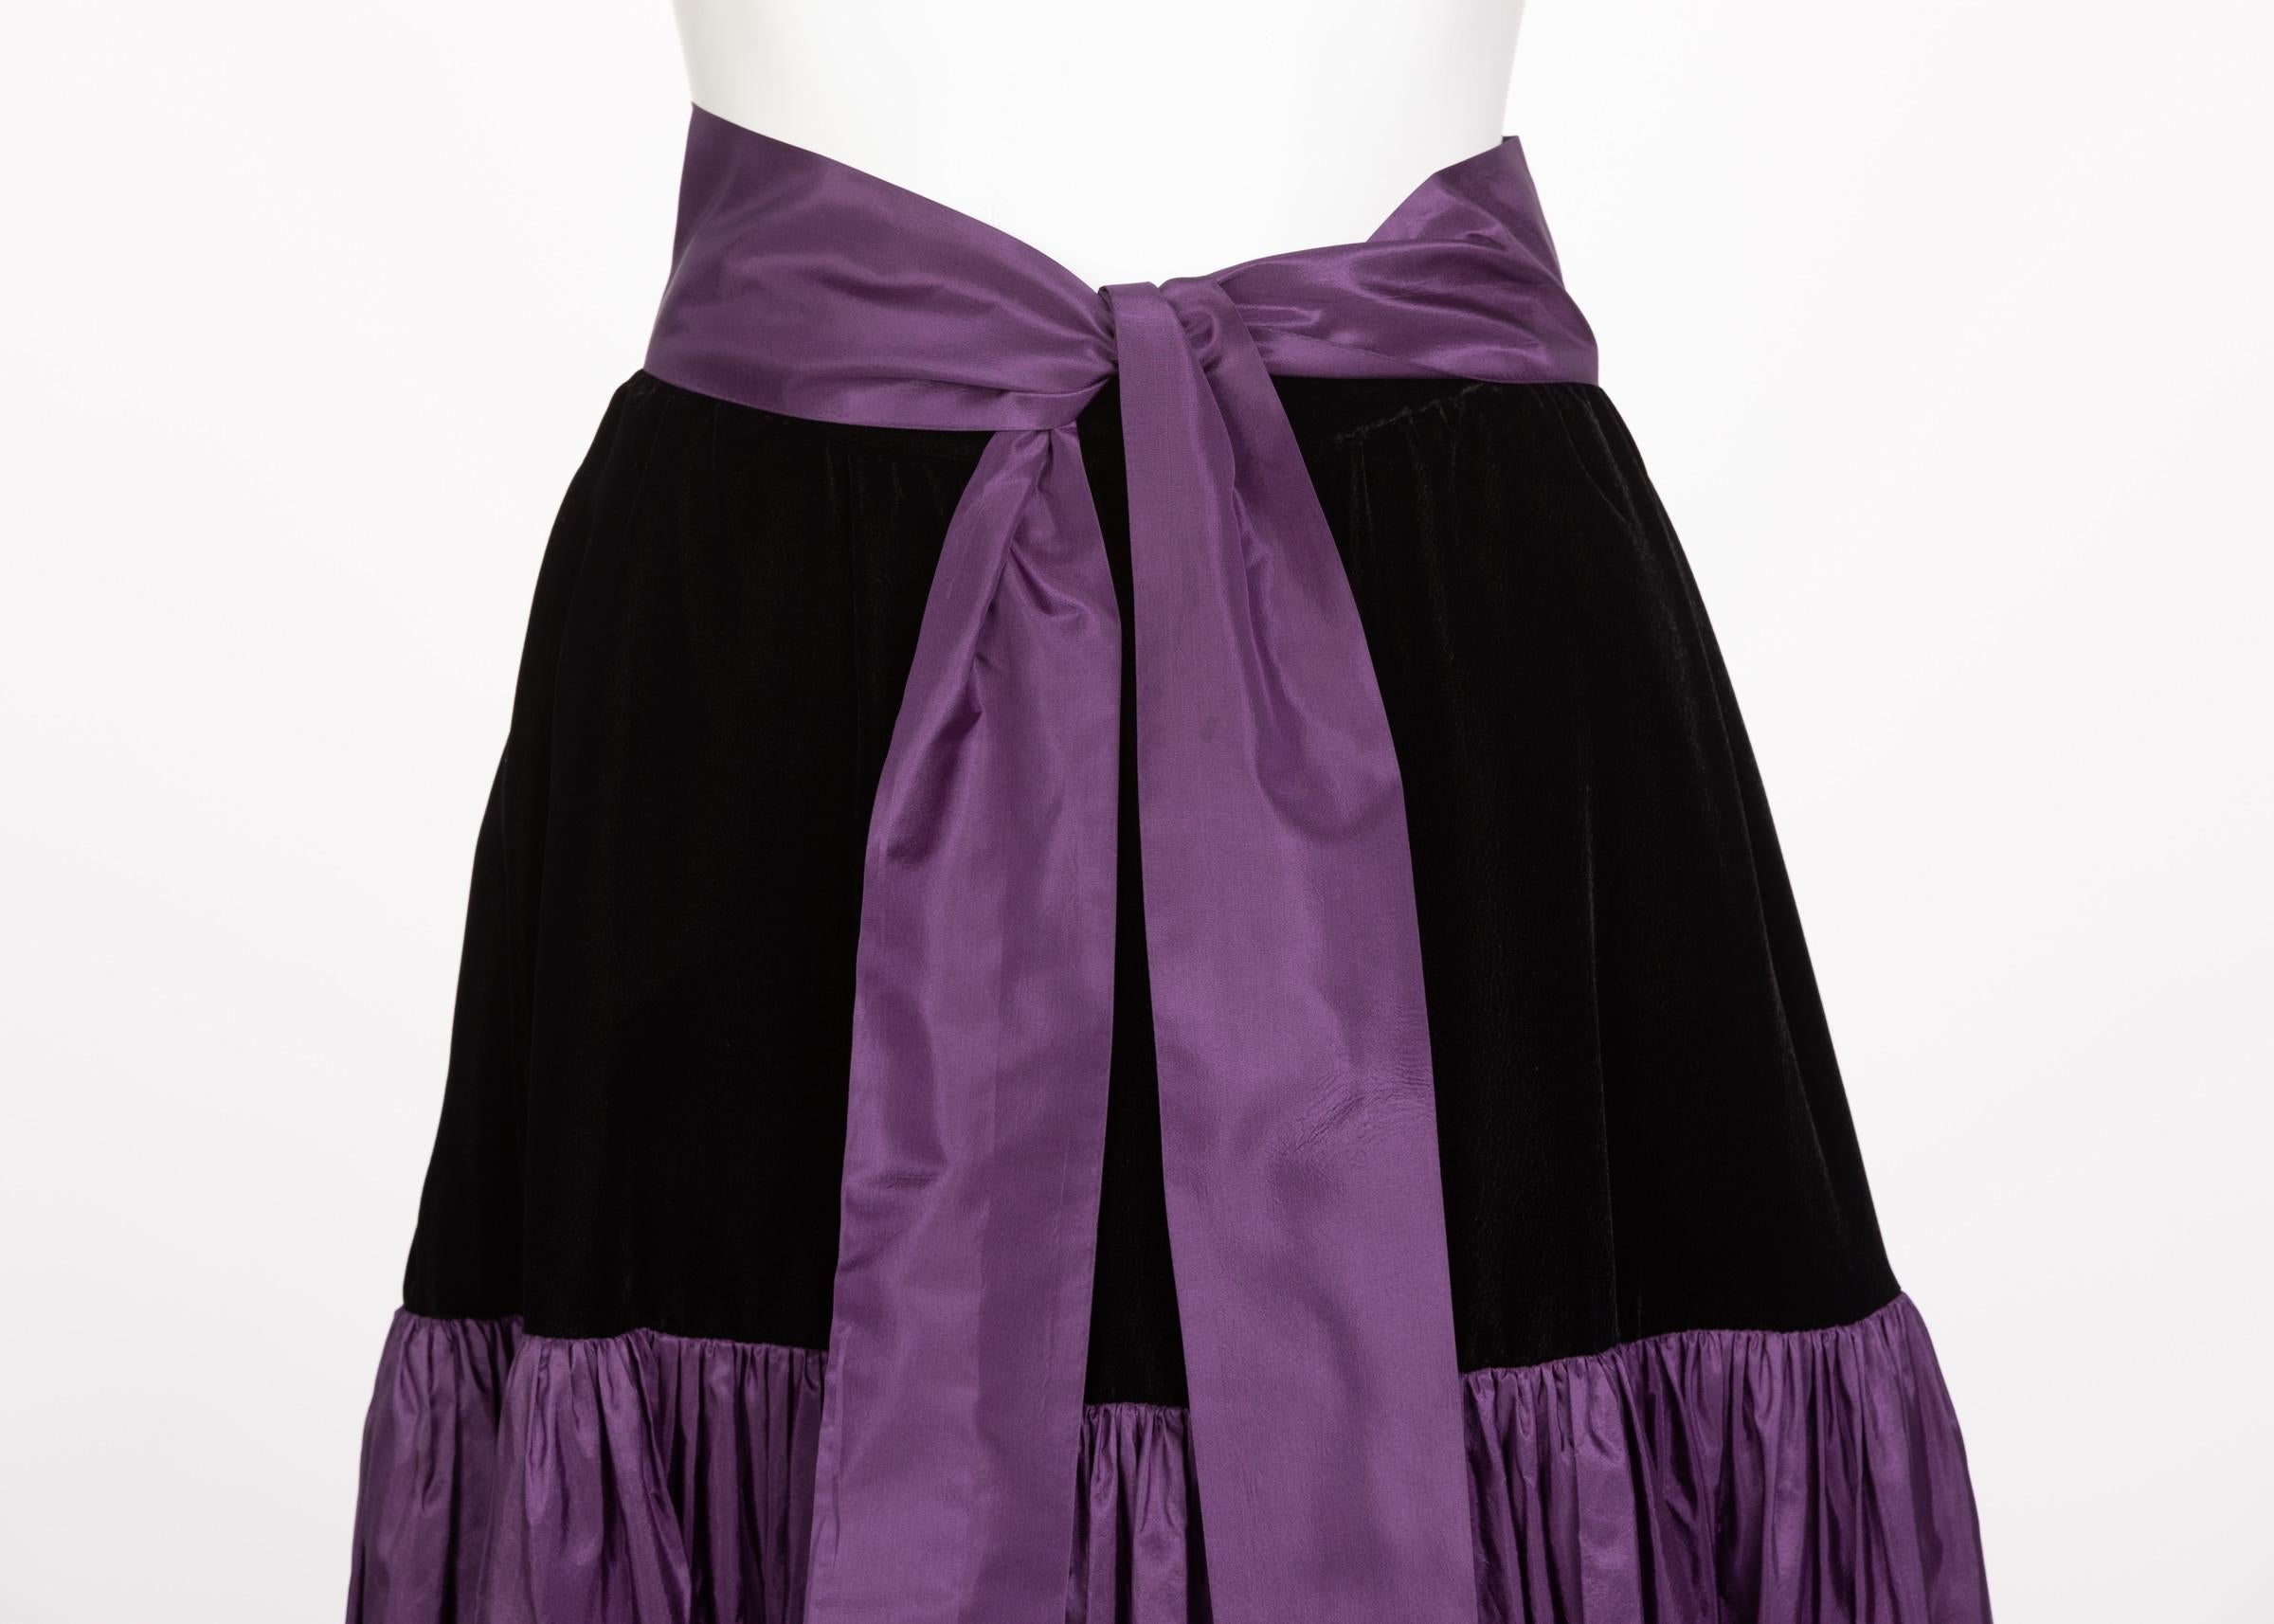 Yves Saint Laurent Skirt Russian Collection Purple Skirt YSL, 1970s In Excellent Condition For Sale In Boca Raton, FL